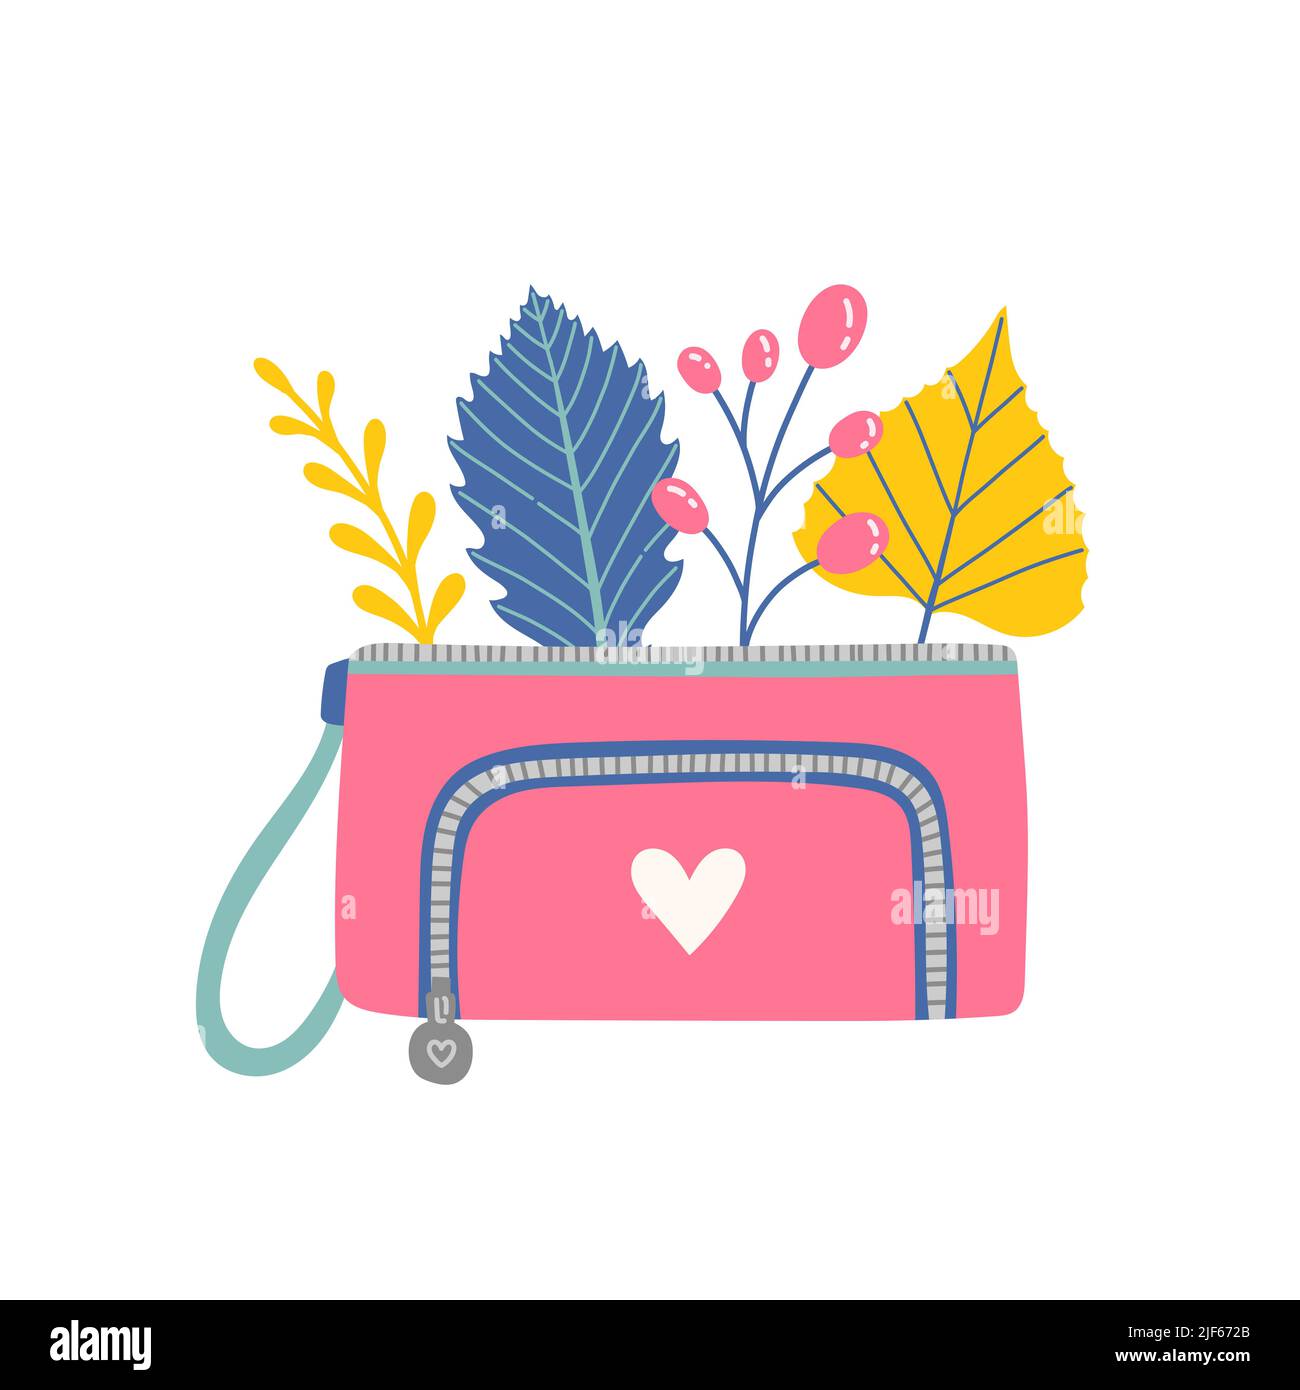 Back to school penal simple vector illustration Stock Vector